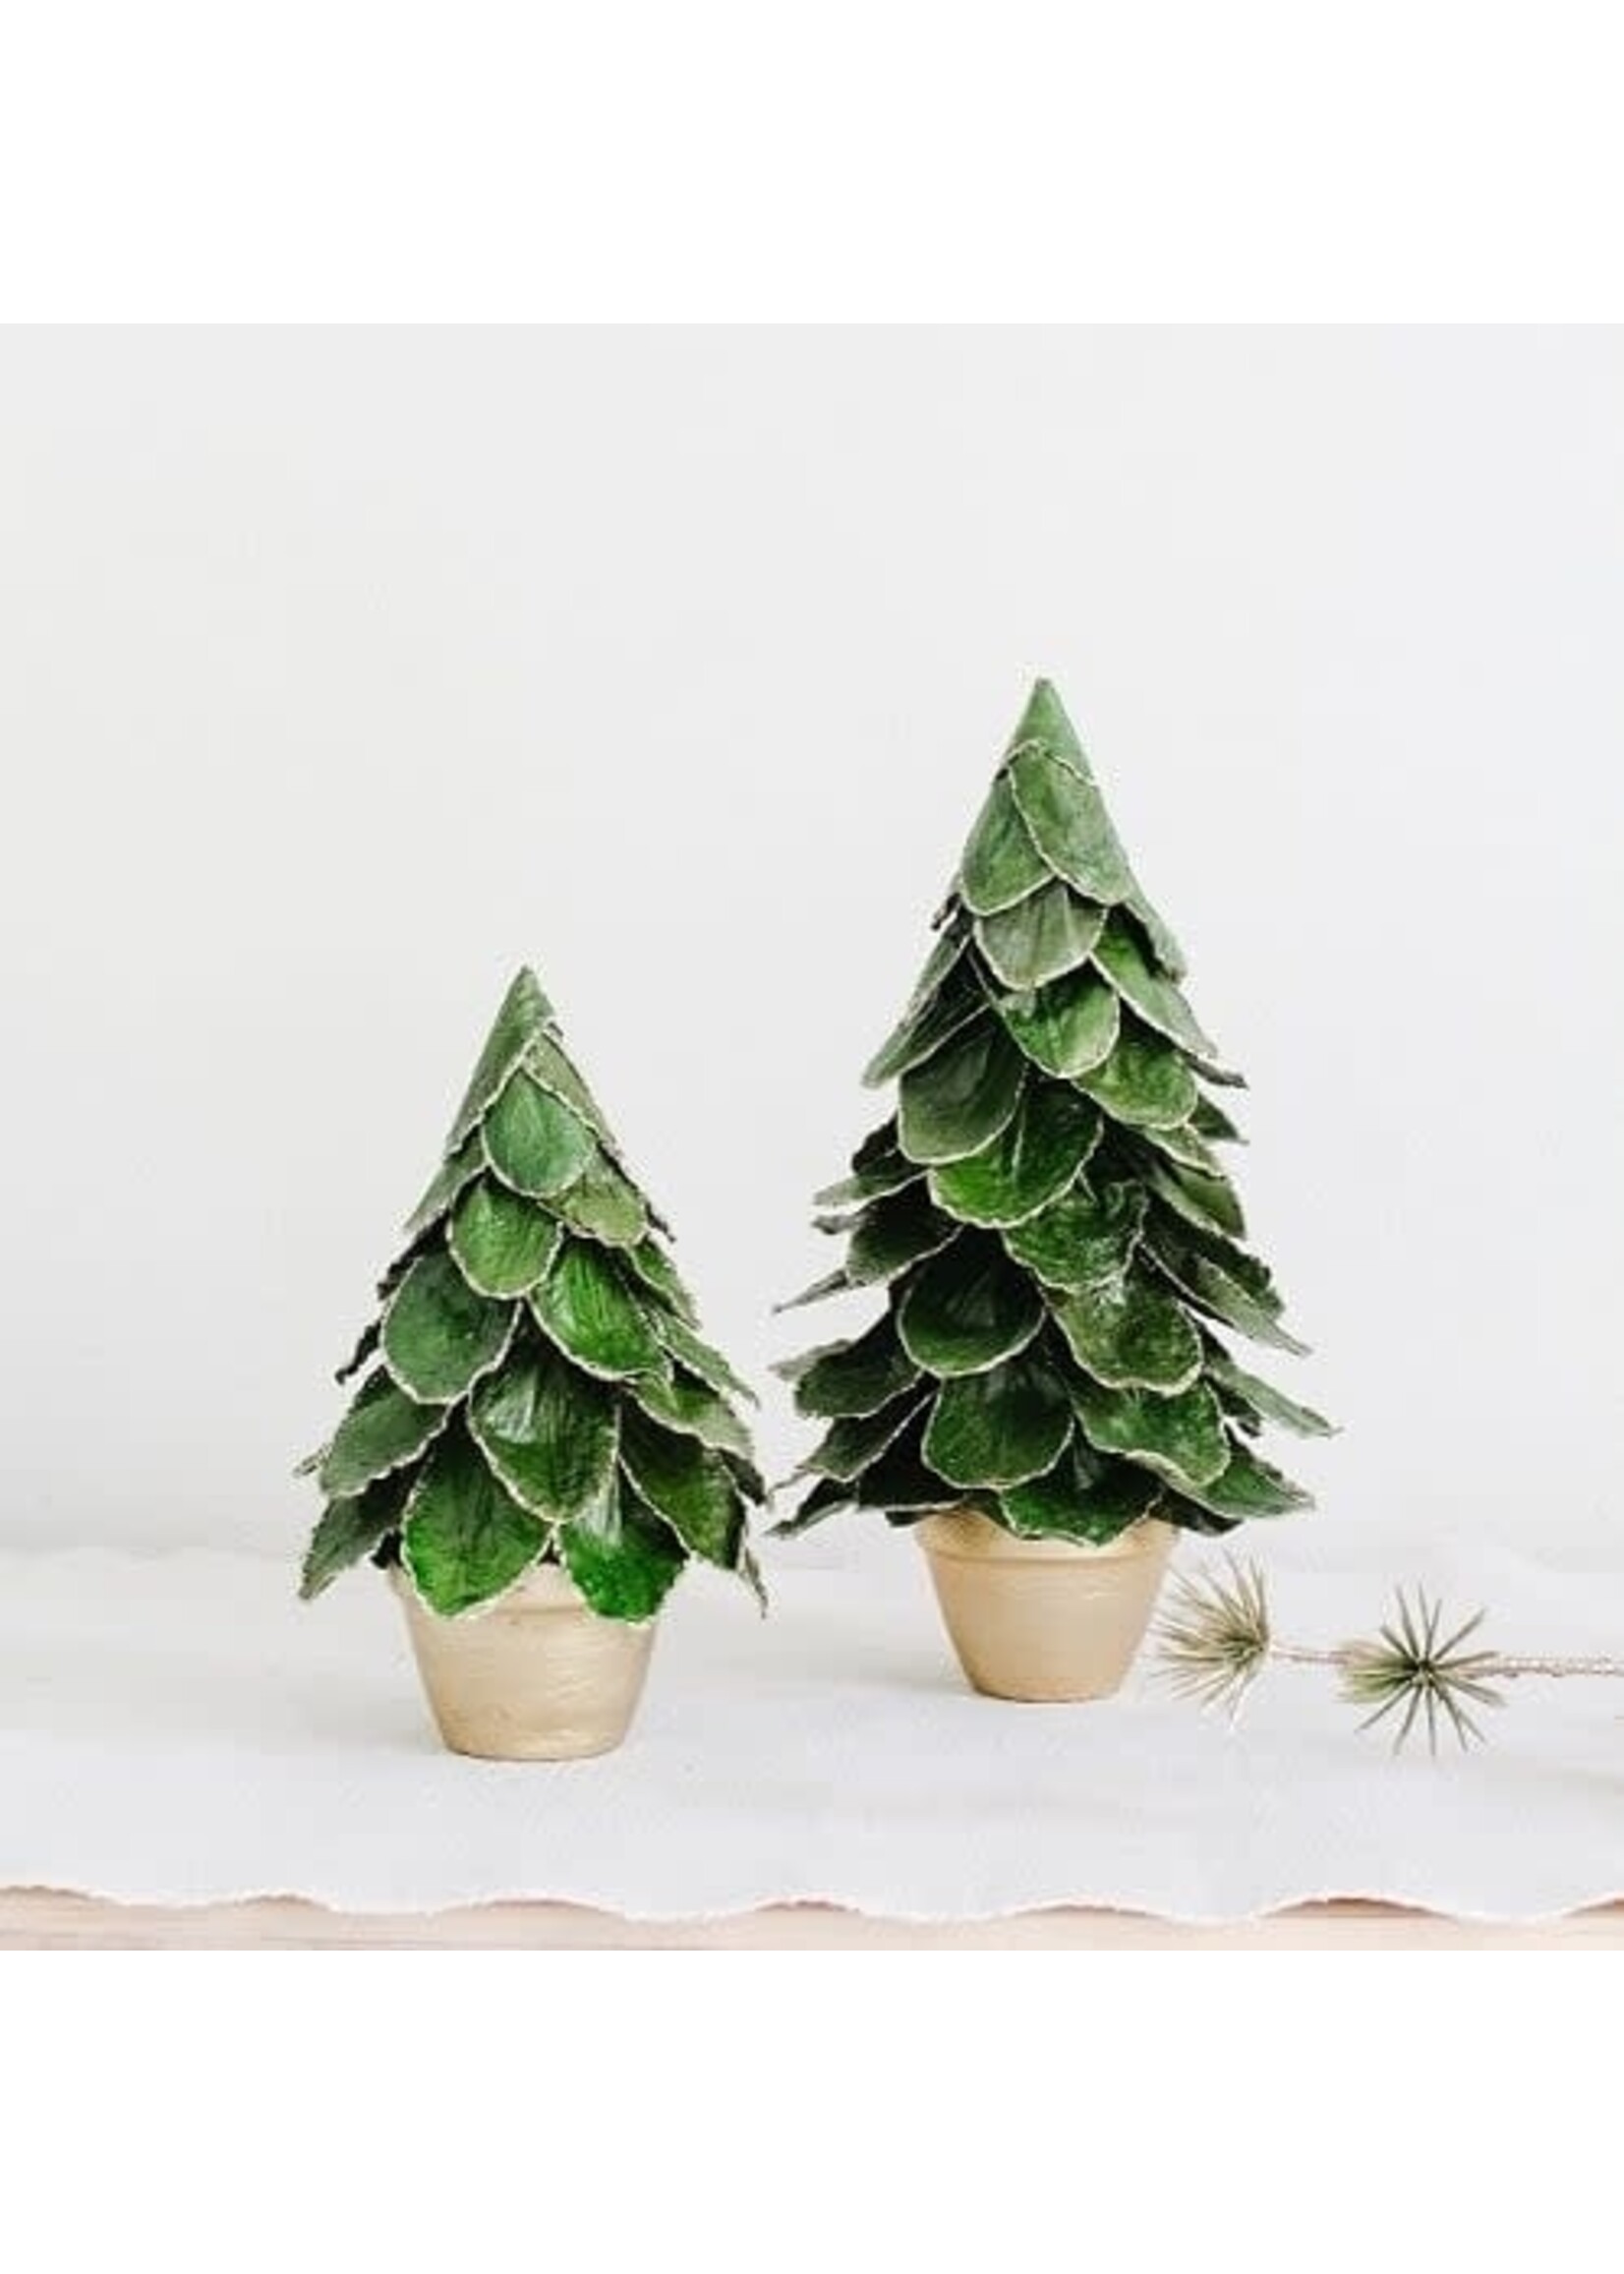 Tree - Potted Green Butterfly Leaf Cone Tree 22"